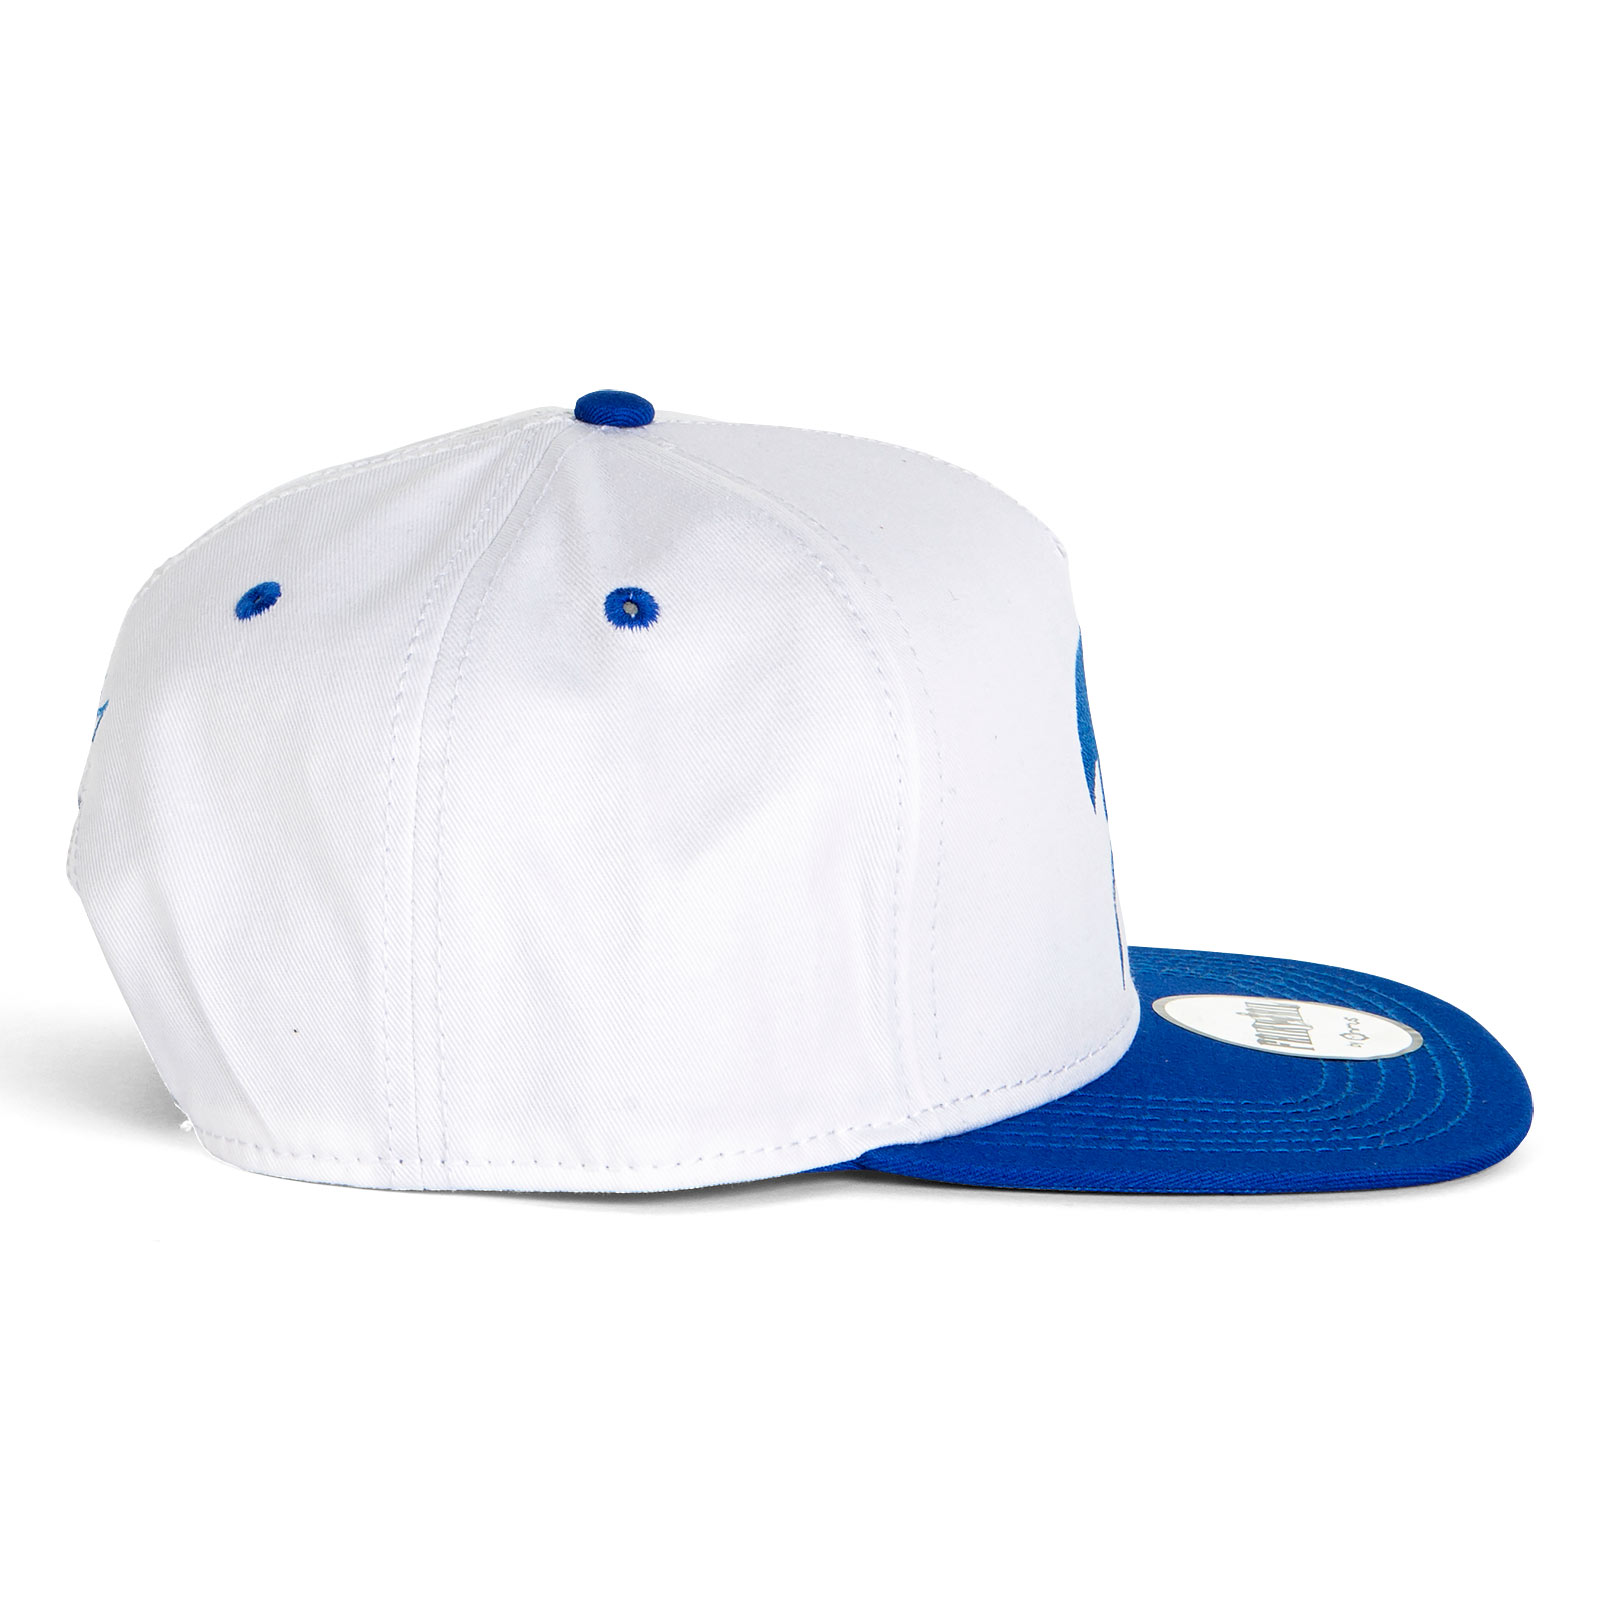 Fairy Tail - Casquette Snapback Lucy